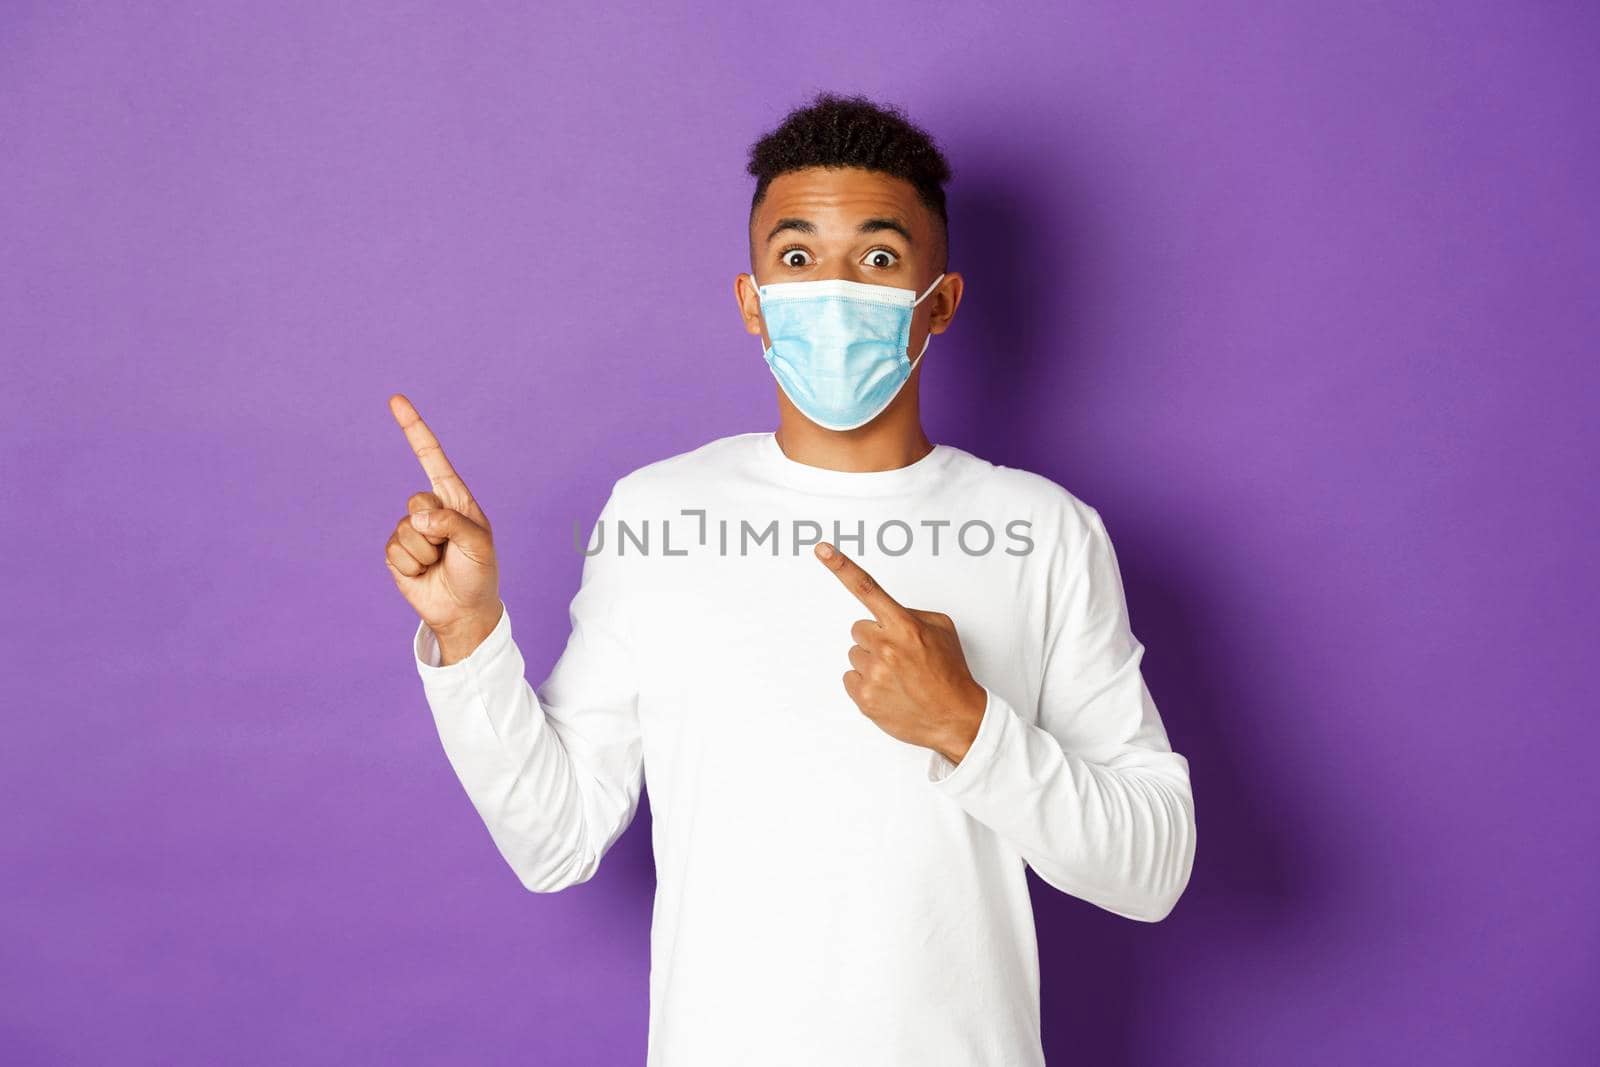 Concept of coronavirus, quarantine and lifestyle. Amazed african-american man in medical mask showing advertisement, pointing at upper left corner and smiling, standing over purple background.